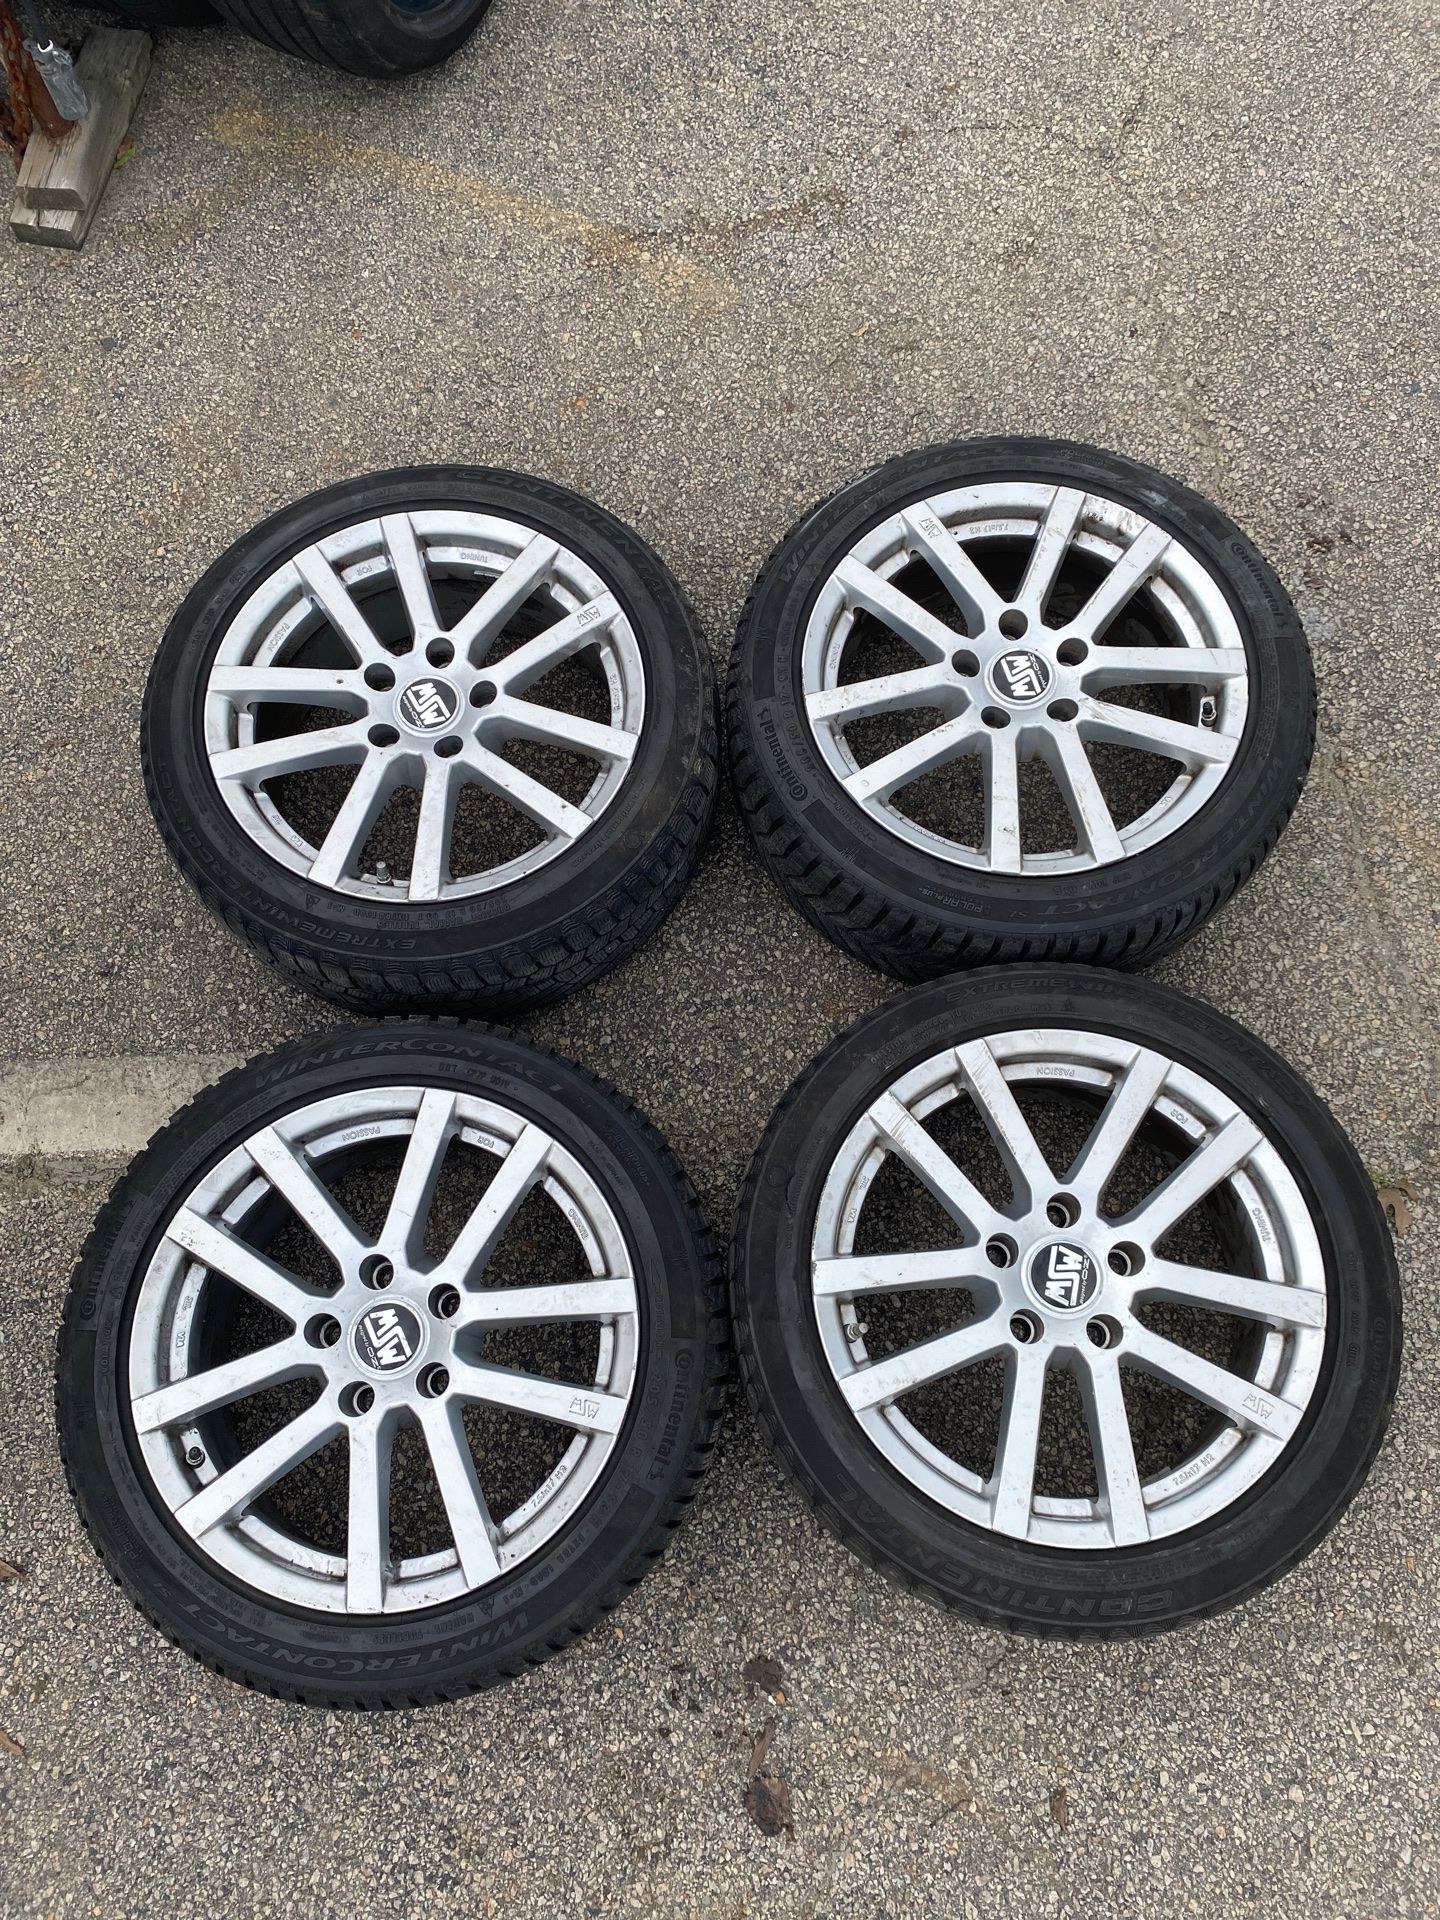 17 inch rims with tires